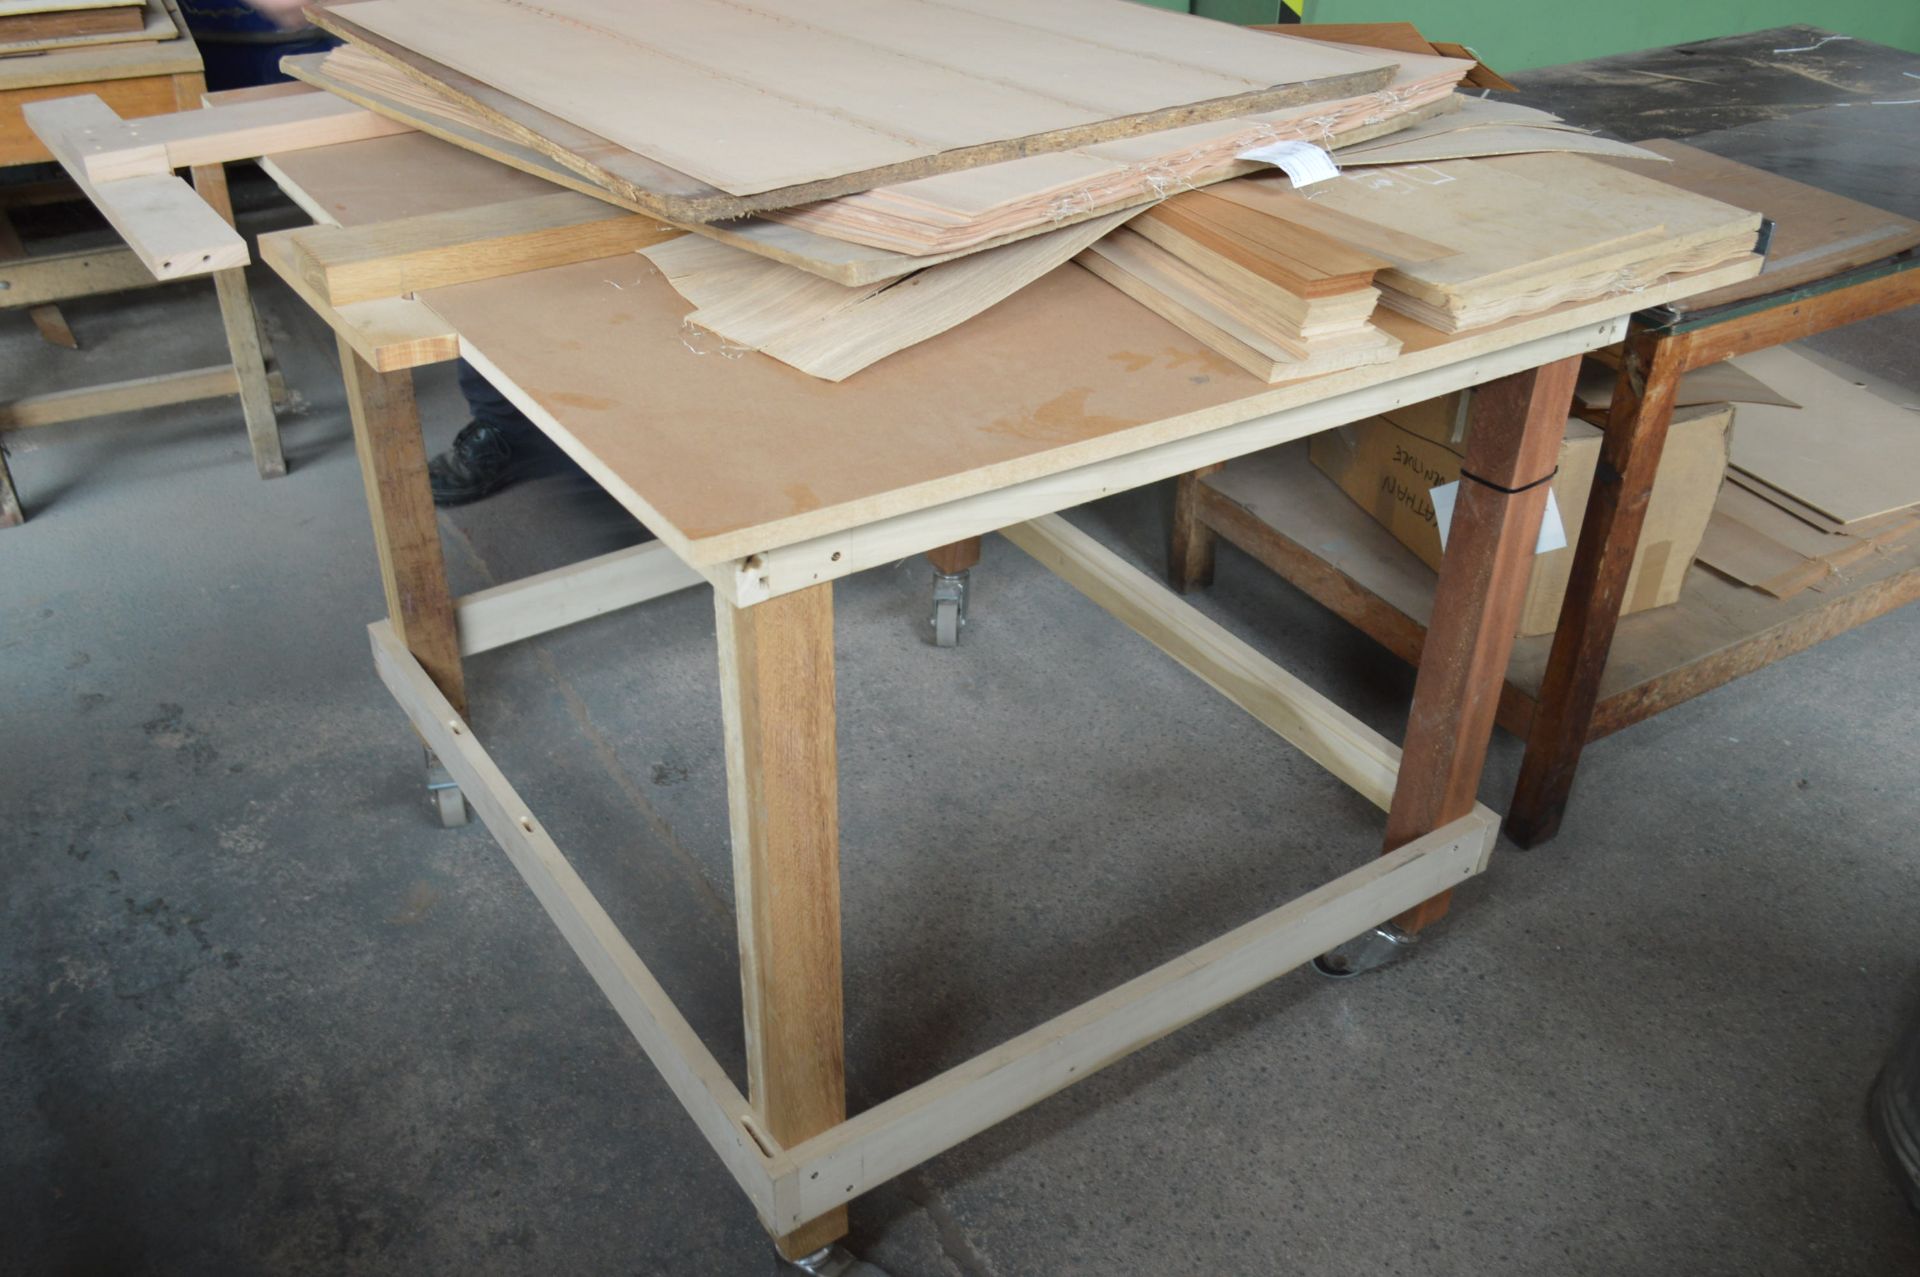 Mobile Timber Framed Bench, approx. 1.22m x 1.085m (contents not included)